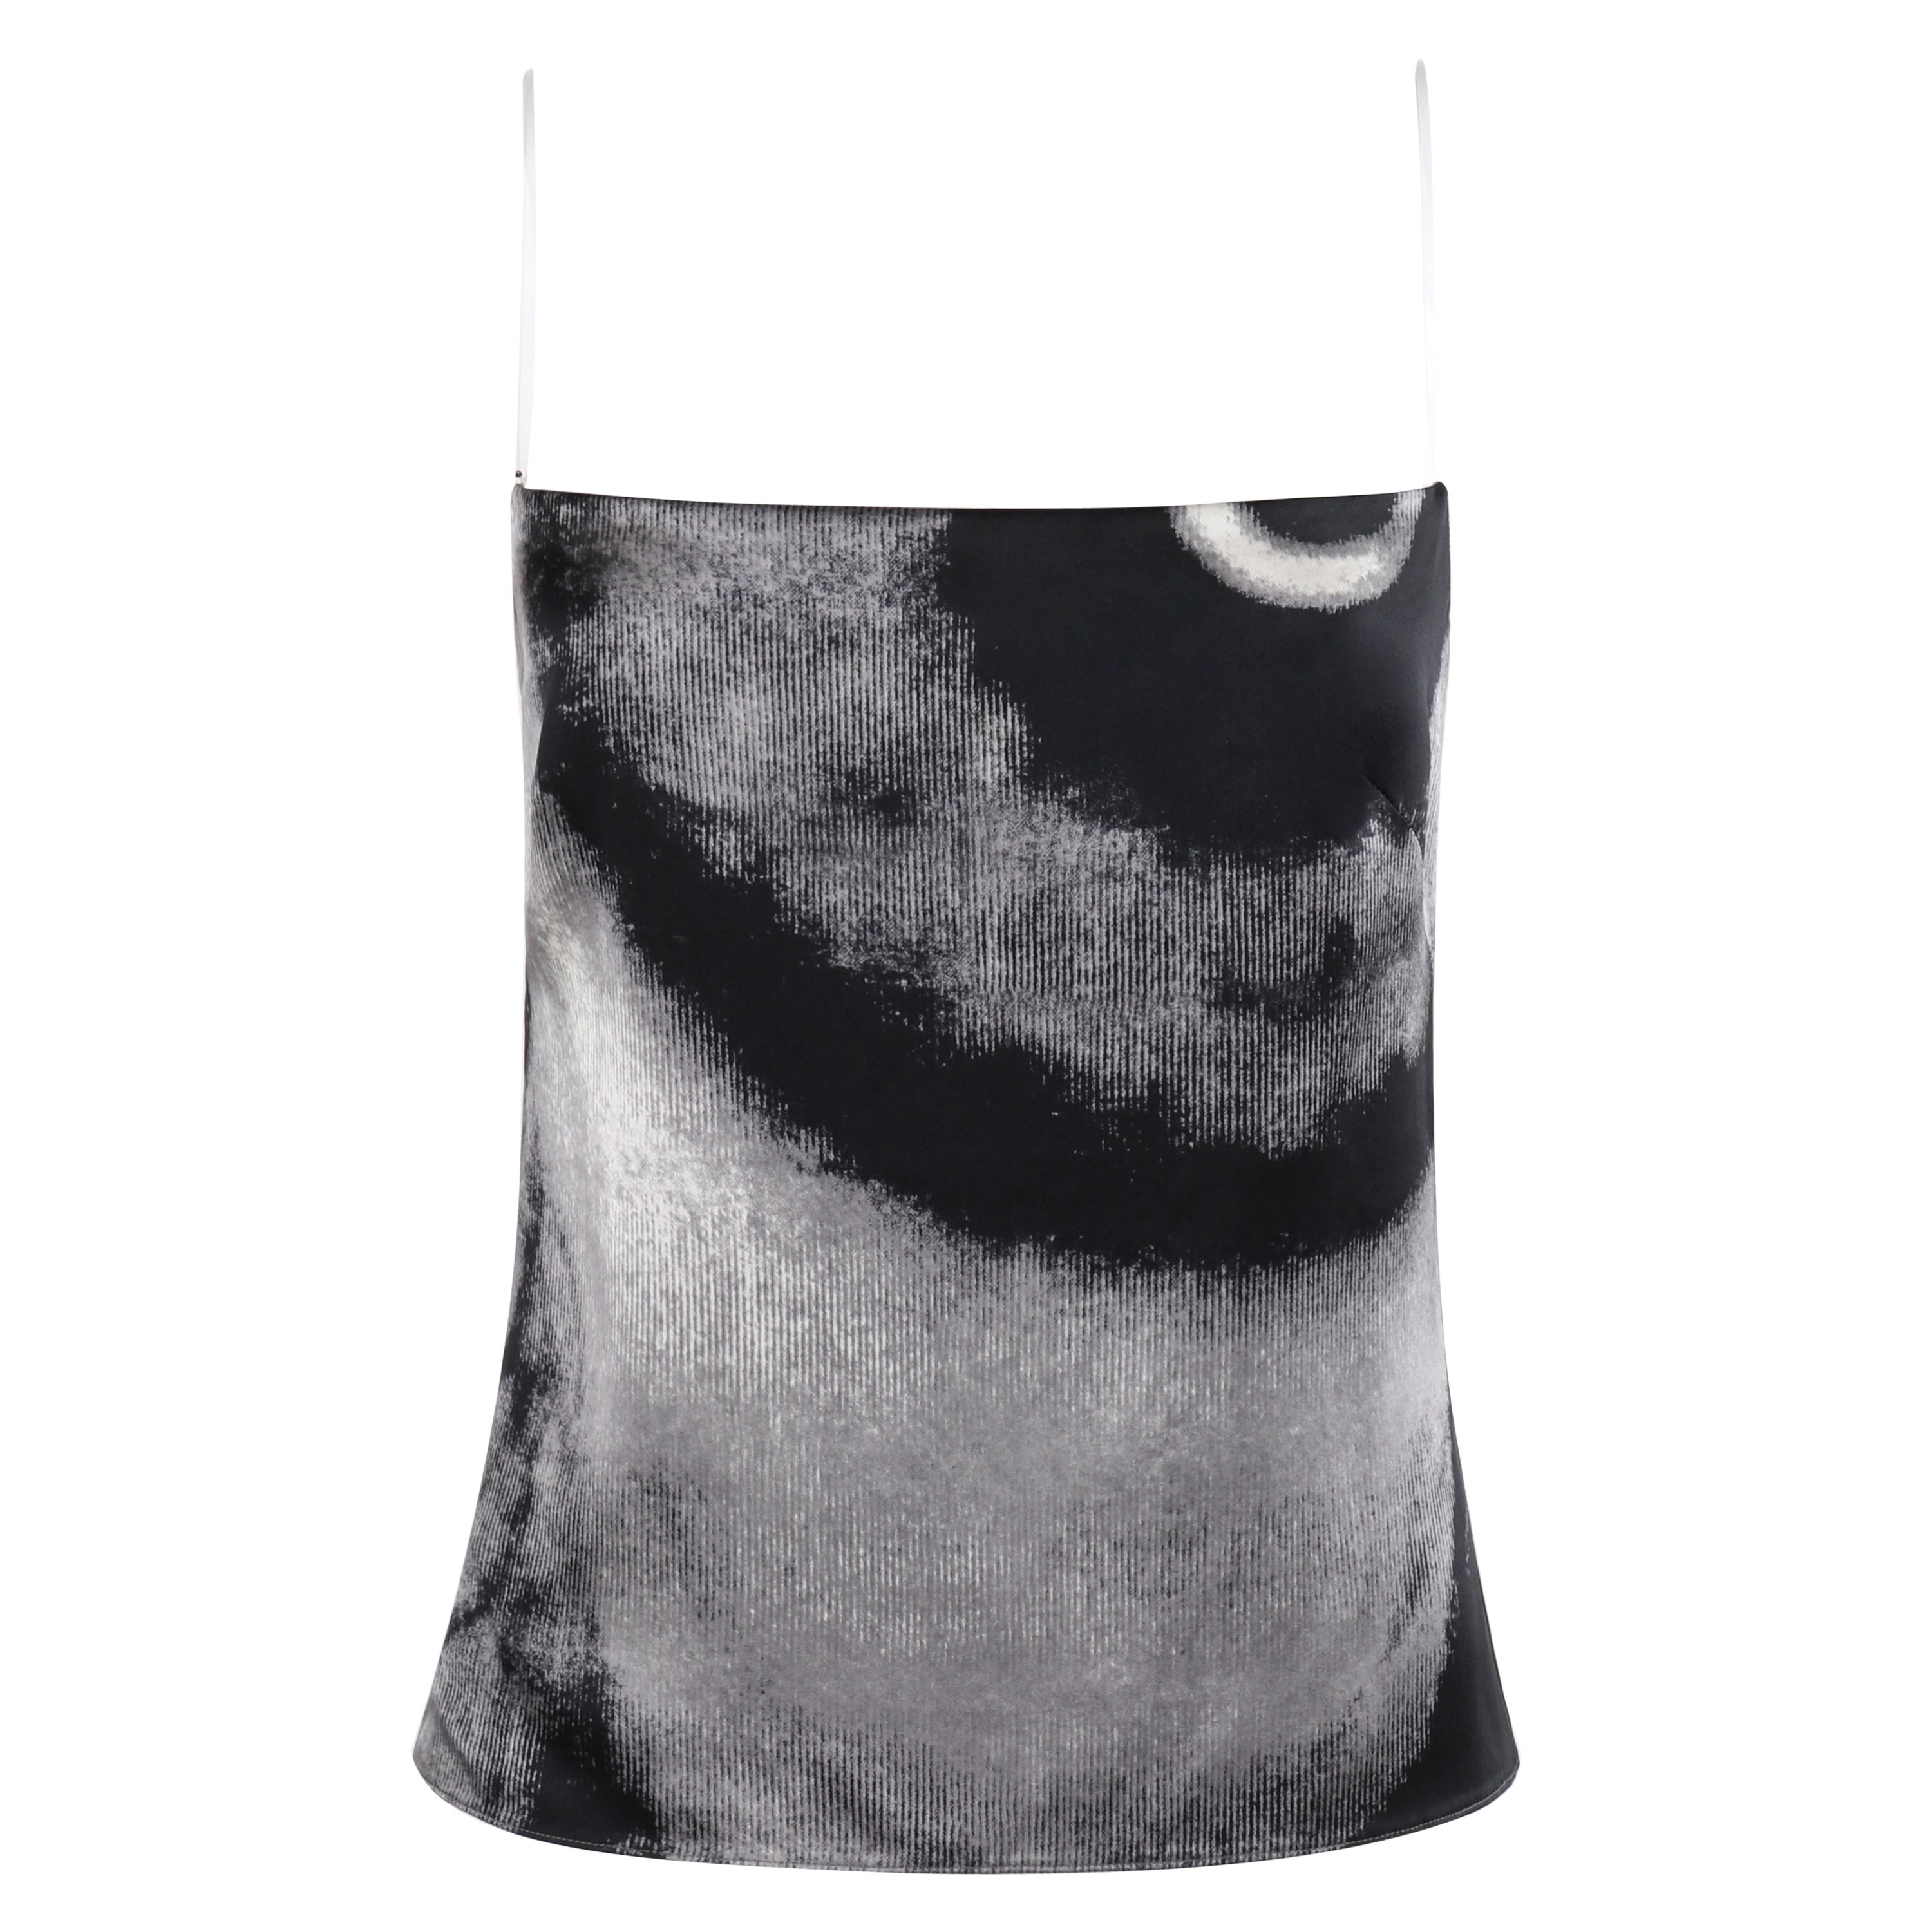 GIVENCHY S/S 1999 ALEXANDER McQUEEN Black White Abstract Eye Illusion Tank Top